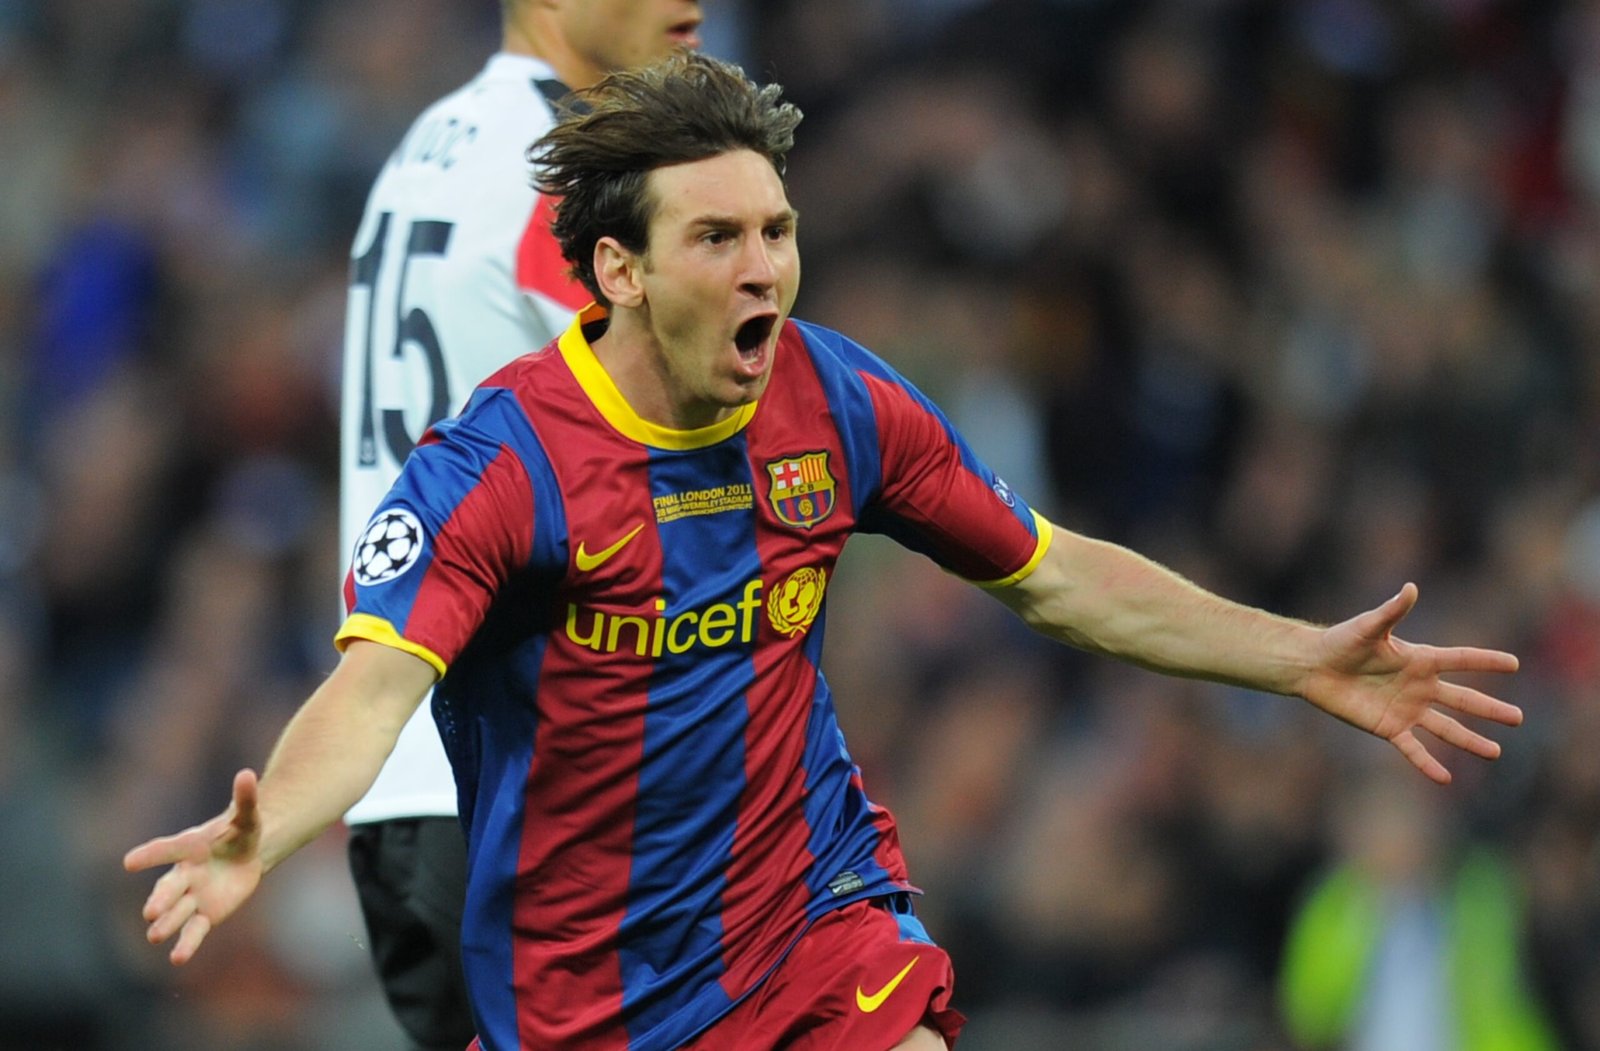 Barcelona's Argentinian forward Lionel Messi celebrates after scoring a goal during the UEFA Champions League final football match FC Barcelona vs. Manchester United, on May 28, 2011 at Wembley stadium in London. AFP PHOTO / LLUIS GENE (Photo credit should read LLUIS GENE/AFP via Getty Images)